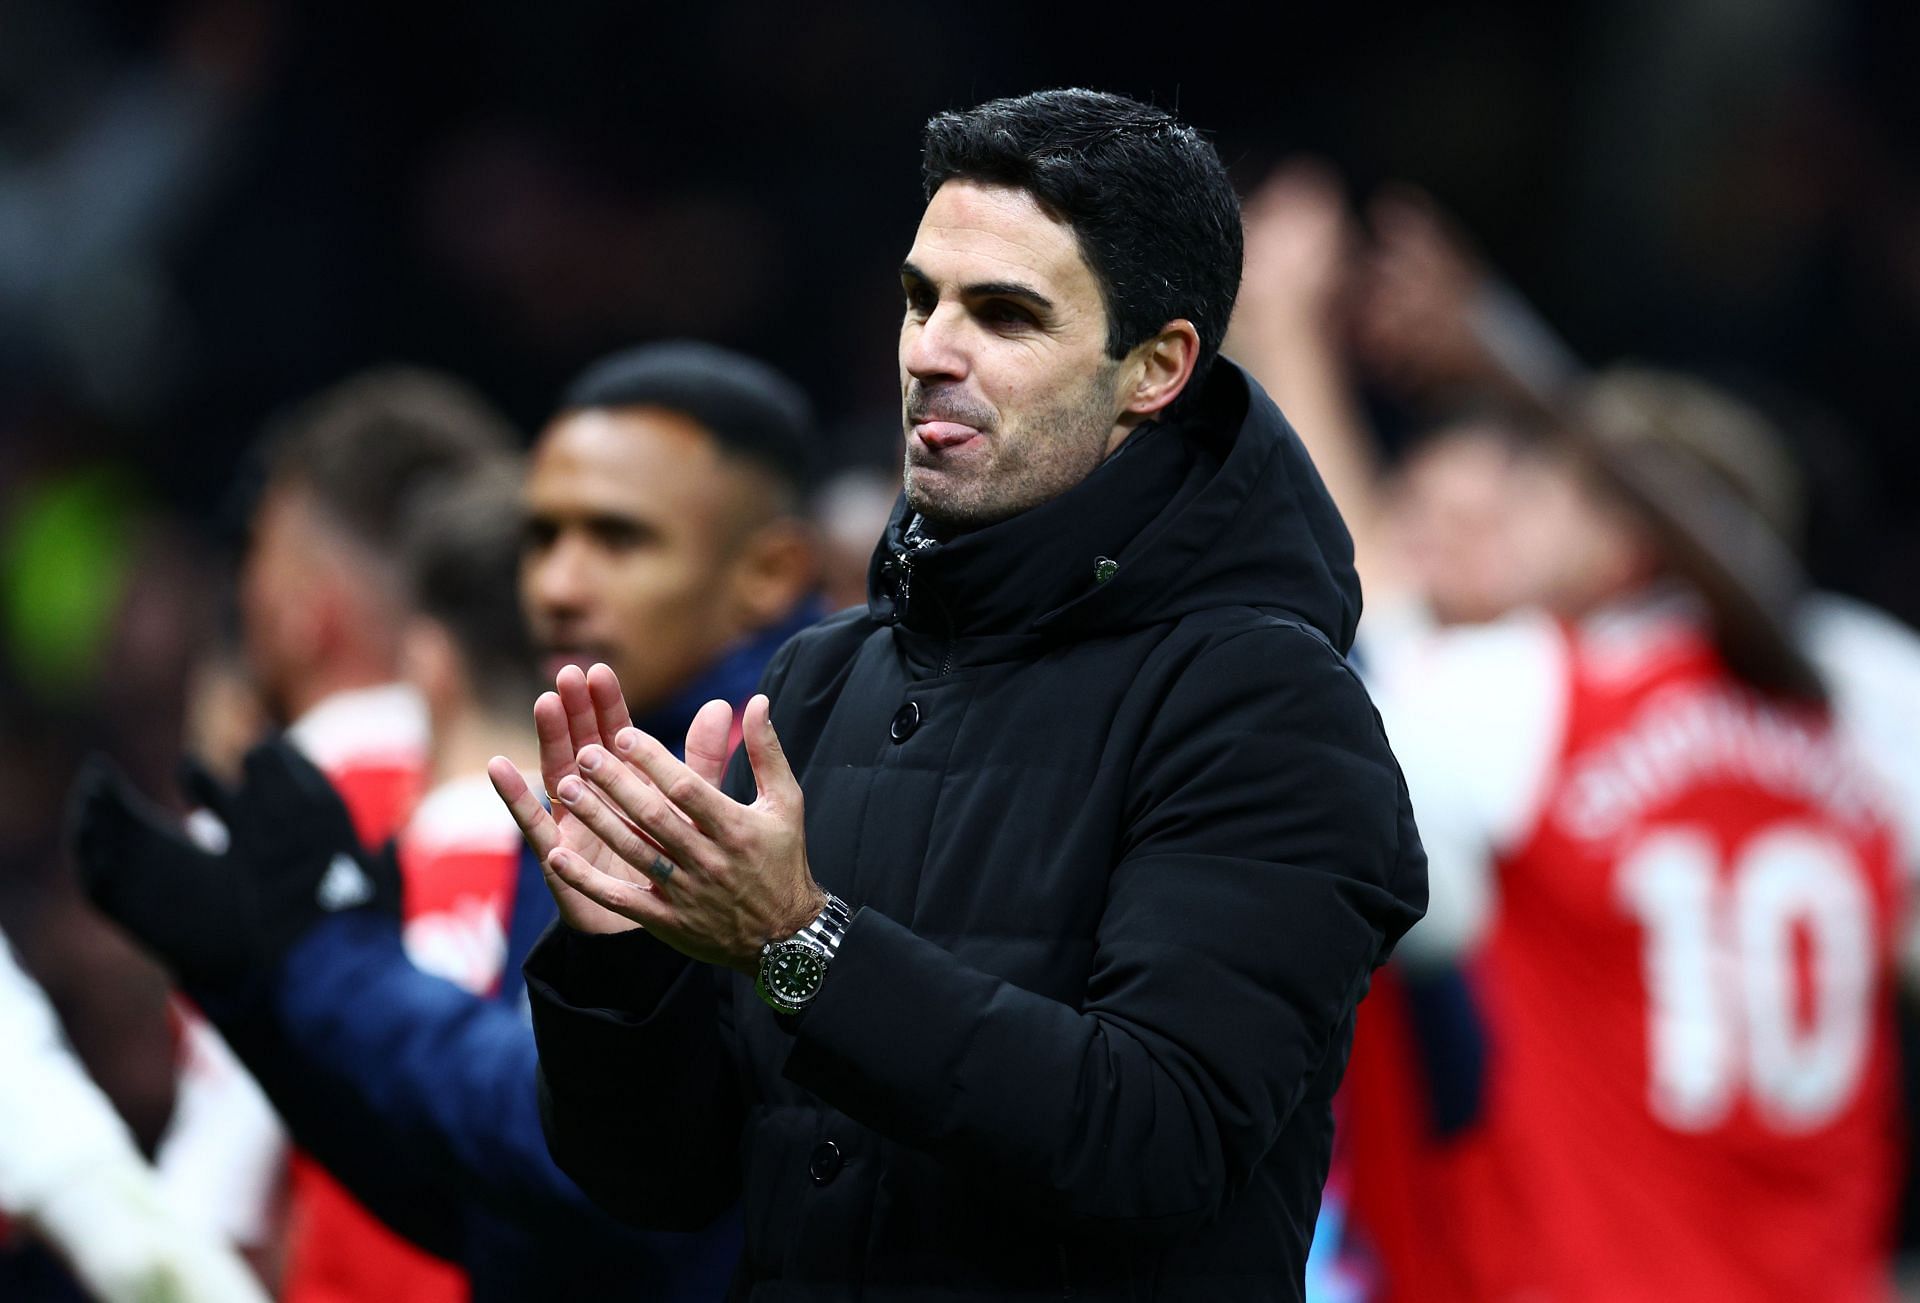 Mikel Arteta warns his side they still have work to do.